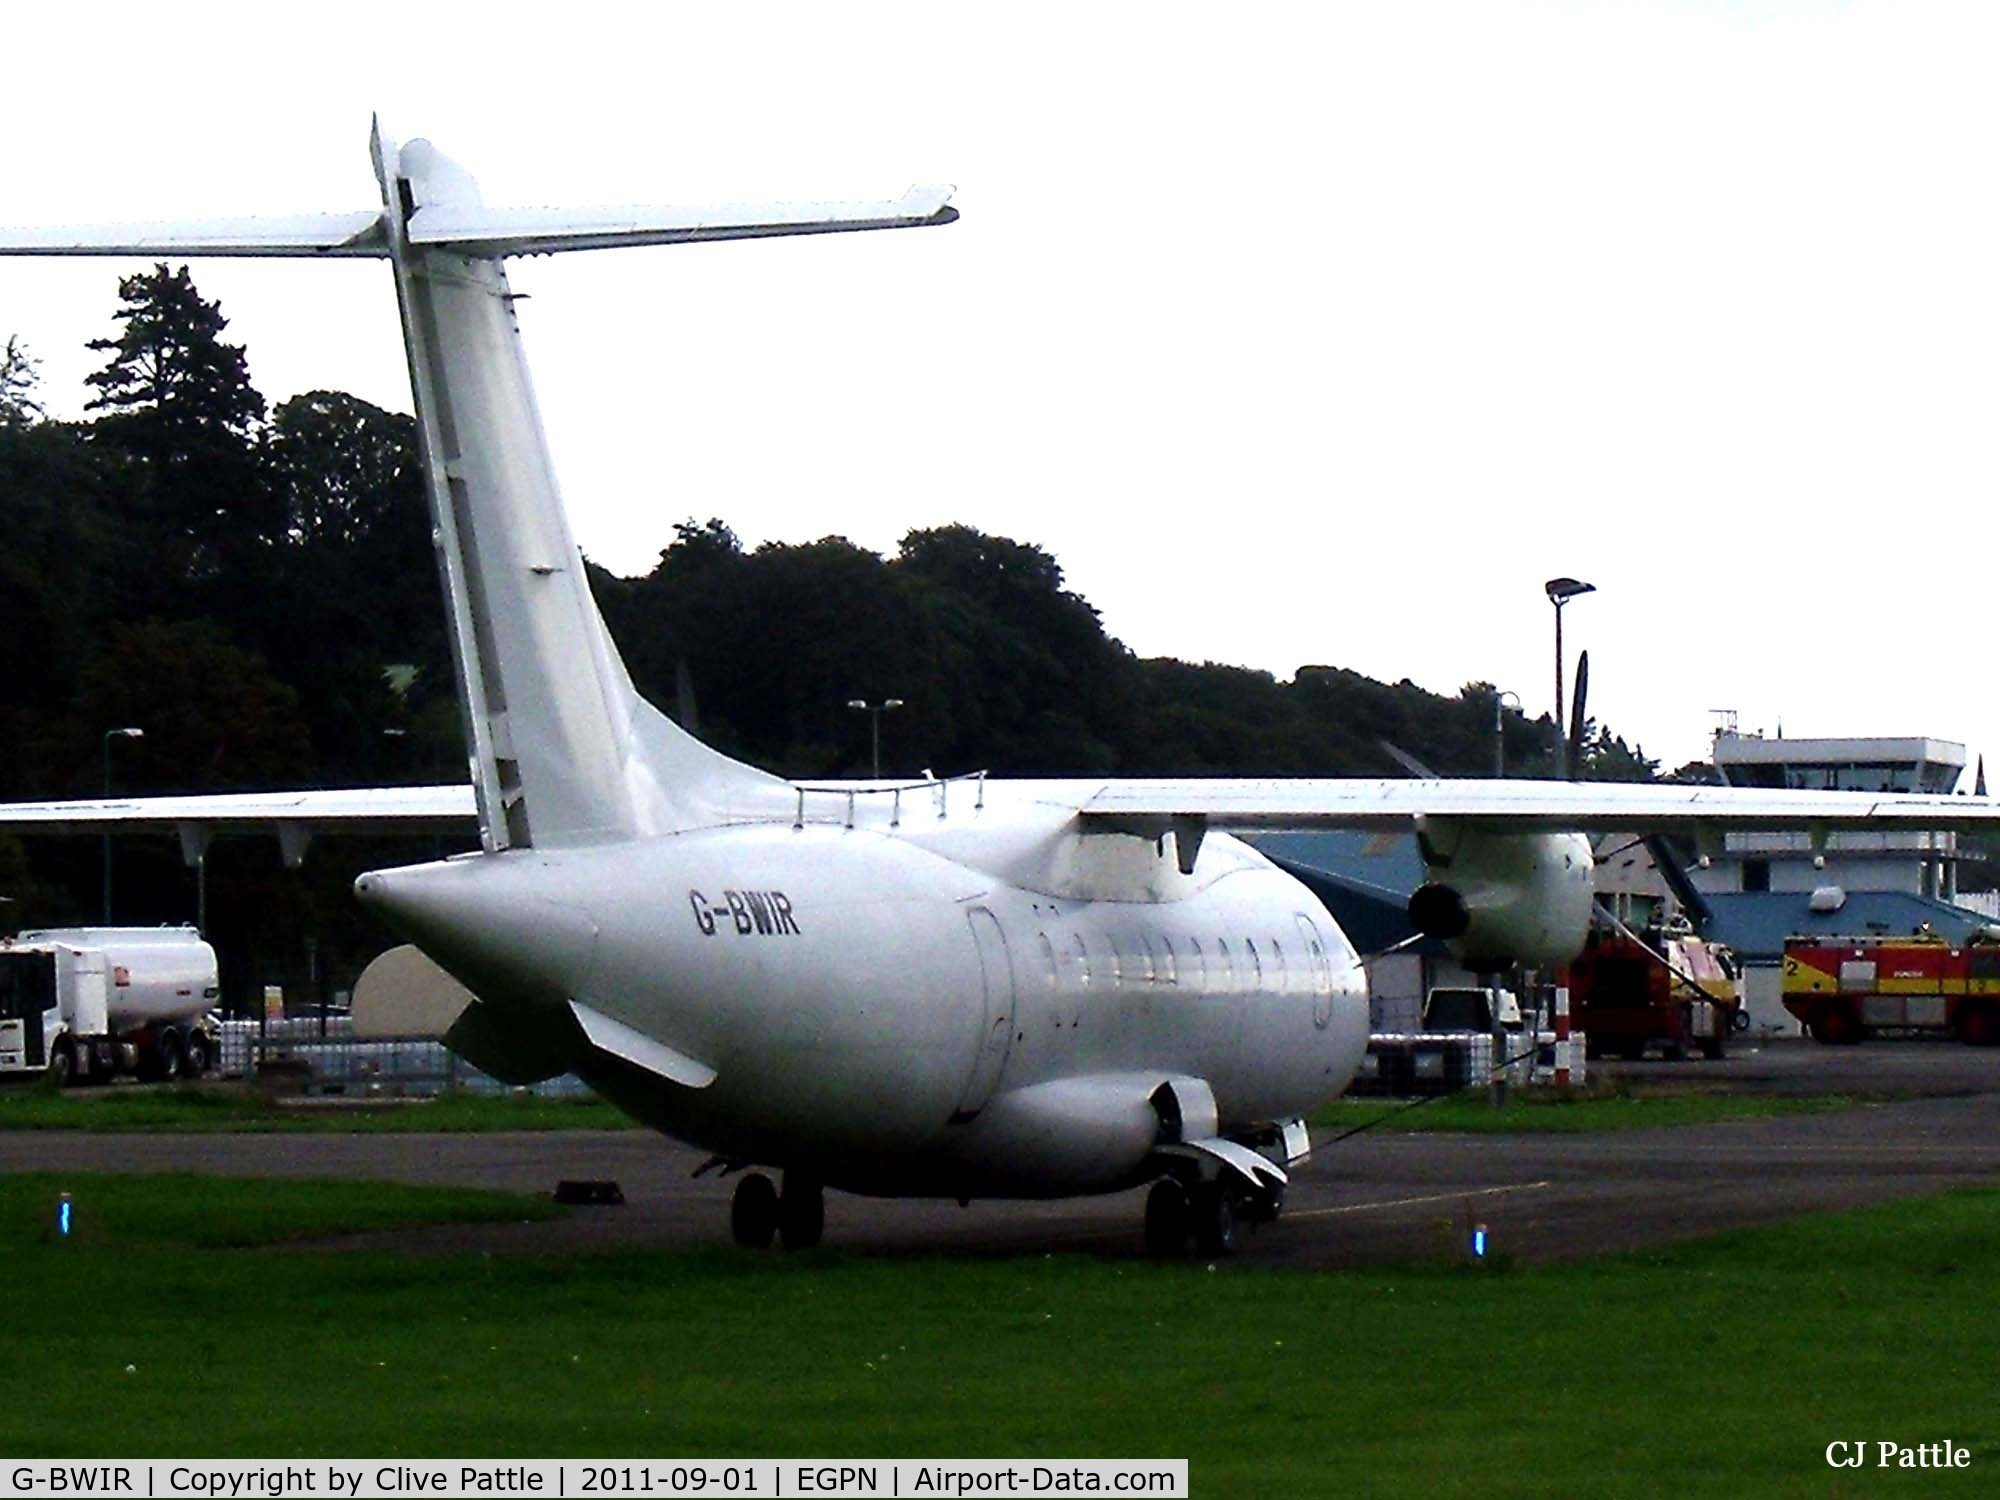 G-BWIR, 1995 Dornier 328-100 C/N 3023, Parked up at Dundee